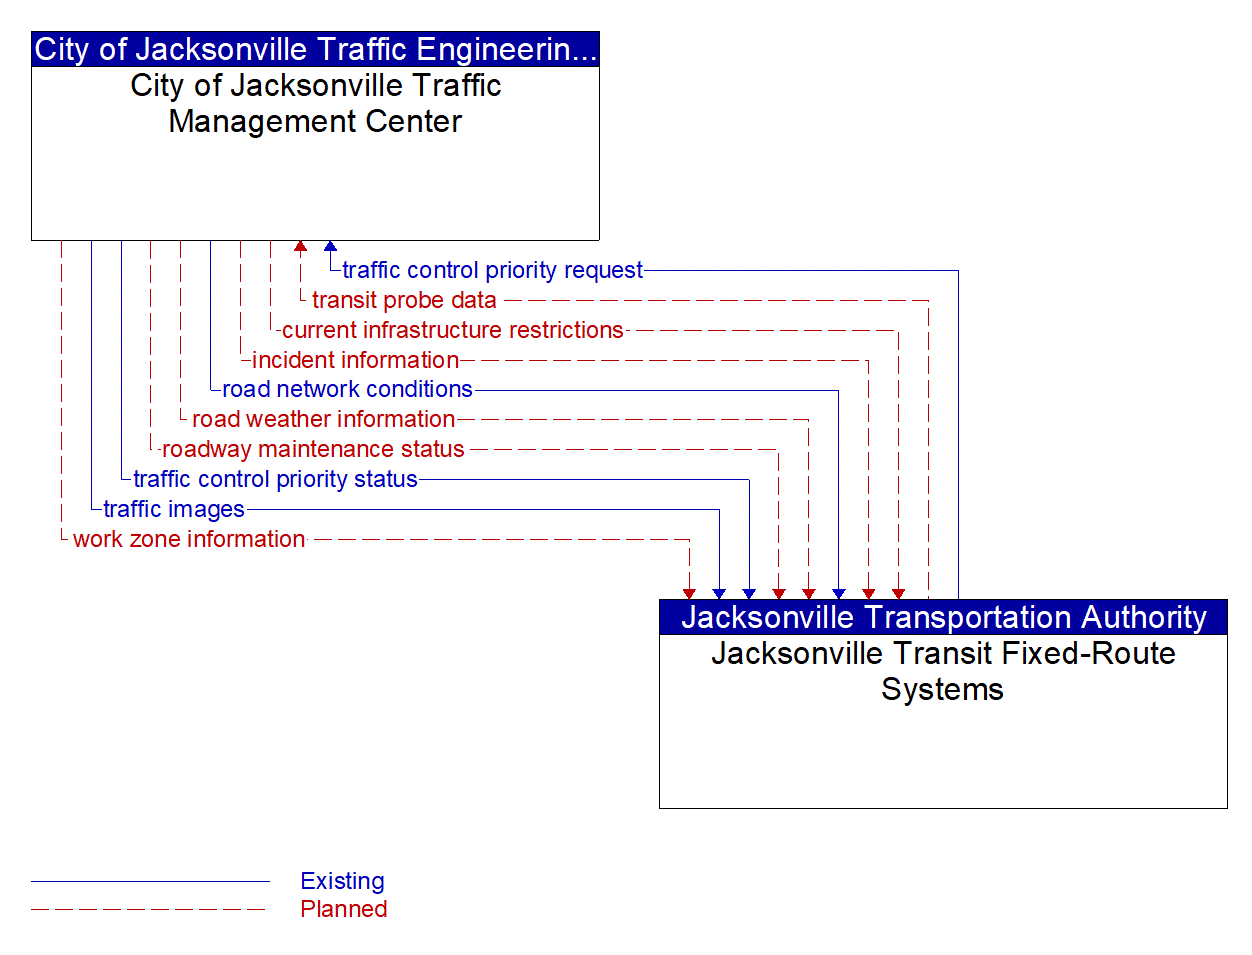 Architecture Flow Diagram: Jacksonville Transit Fixed-Route Systems <--> City of Jacksonville Traffic Management Center